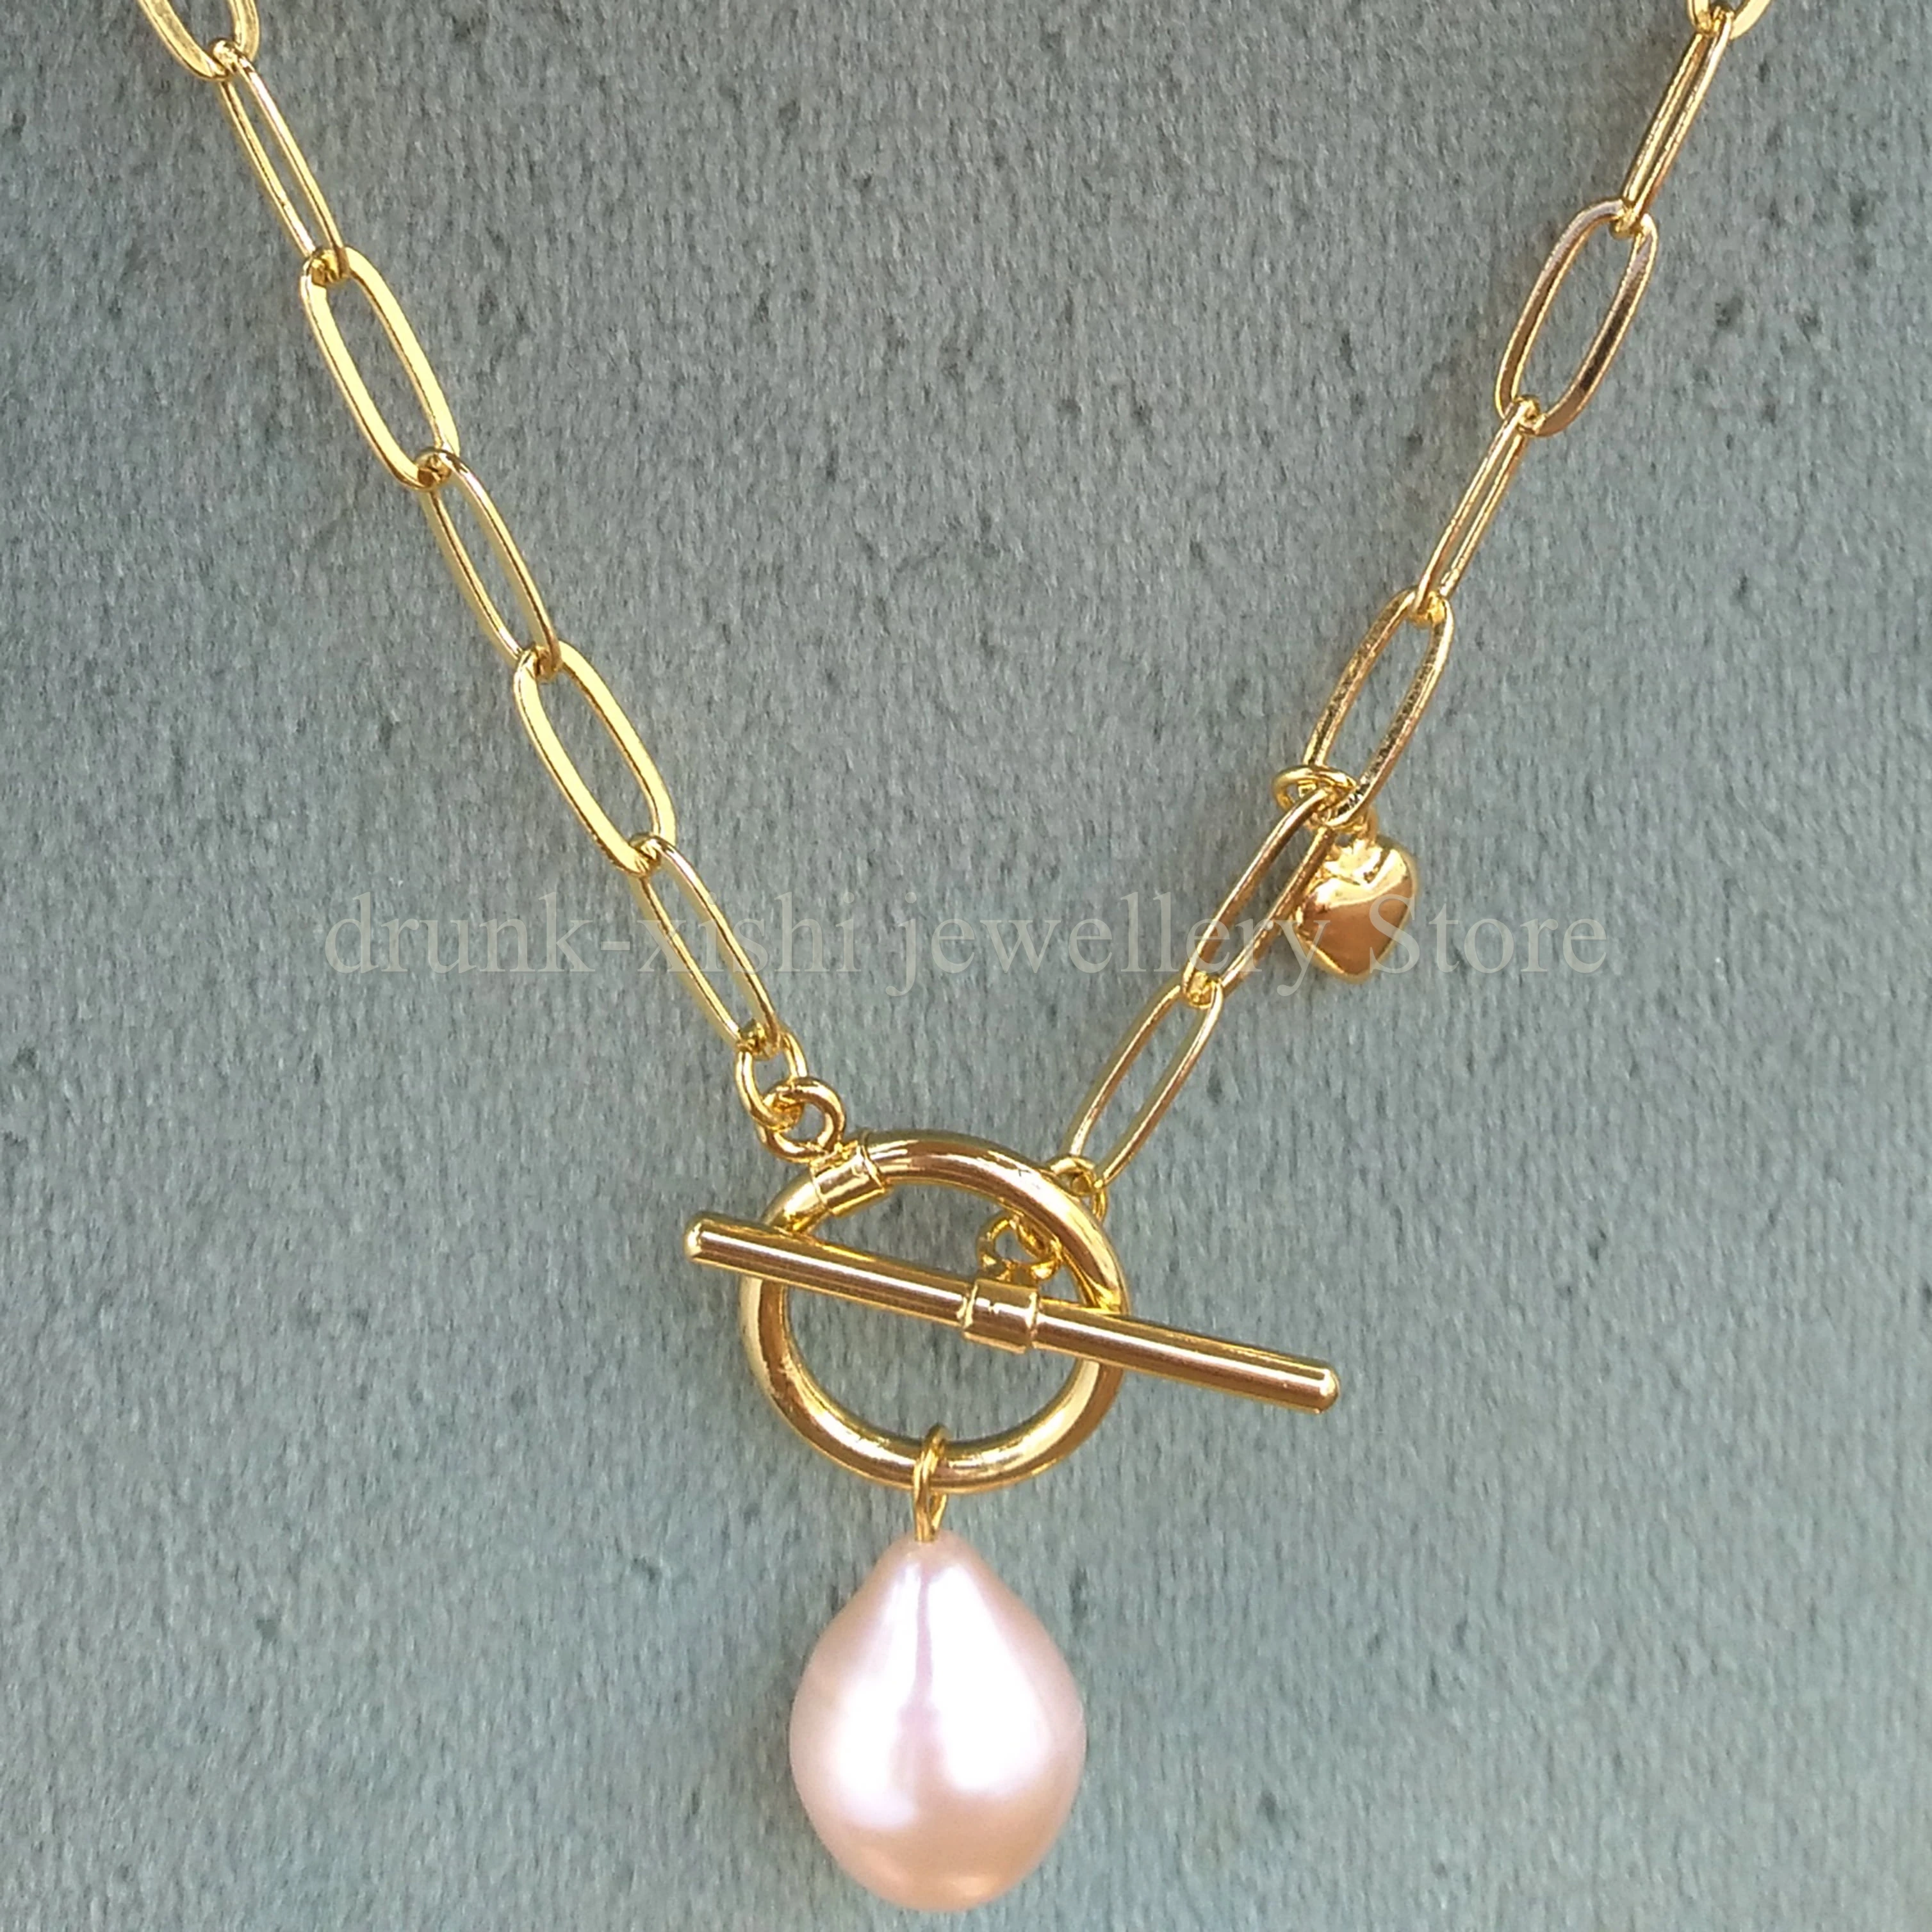 

AAA+ 10-13mm South Sea Teardrop Baroque Gold Pink Natural Real Pearl Pendant Necklace 20in Chain Links OT Clasp Free Shipping